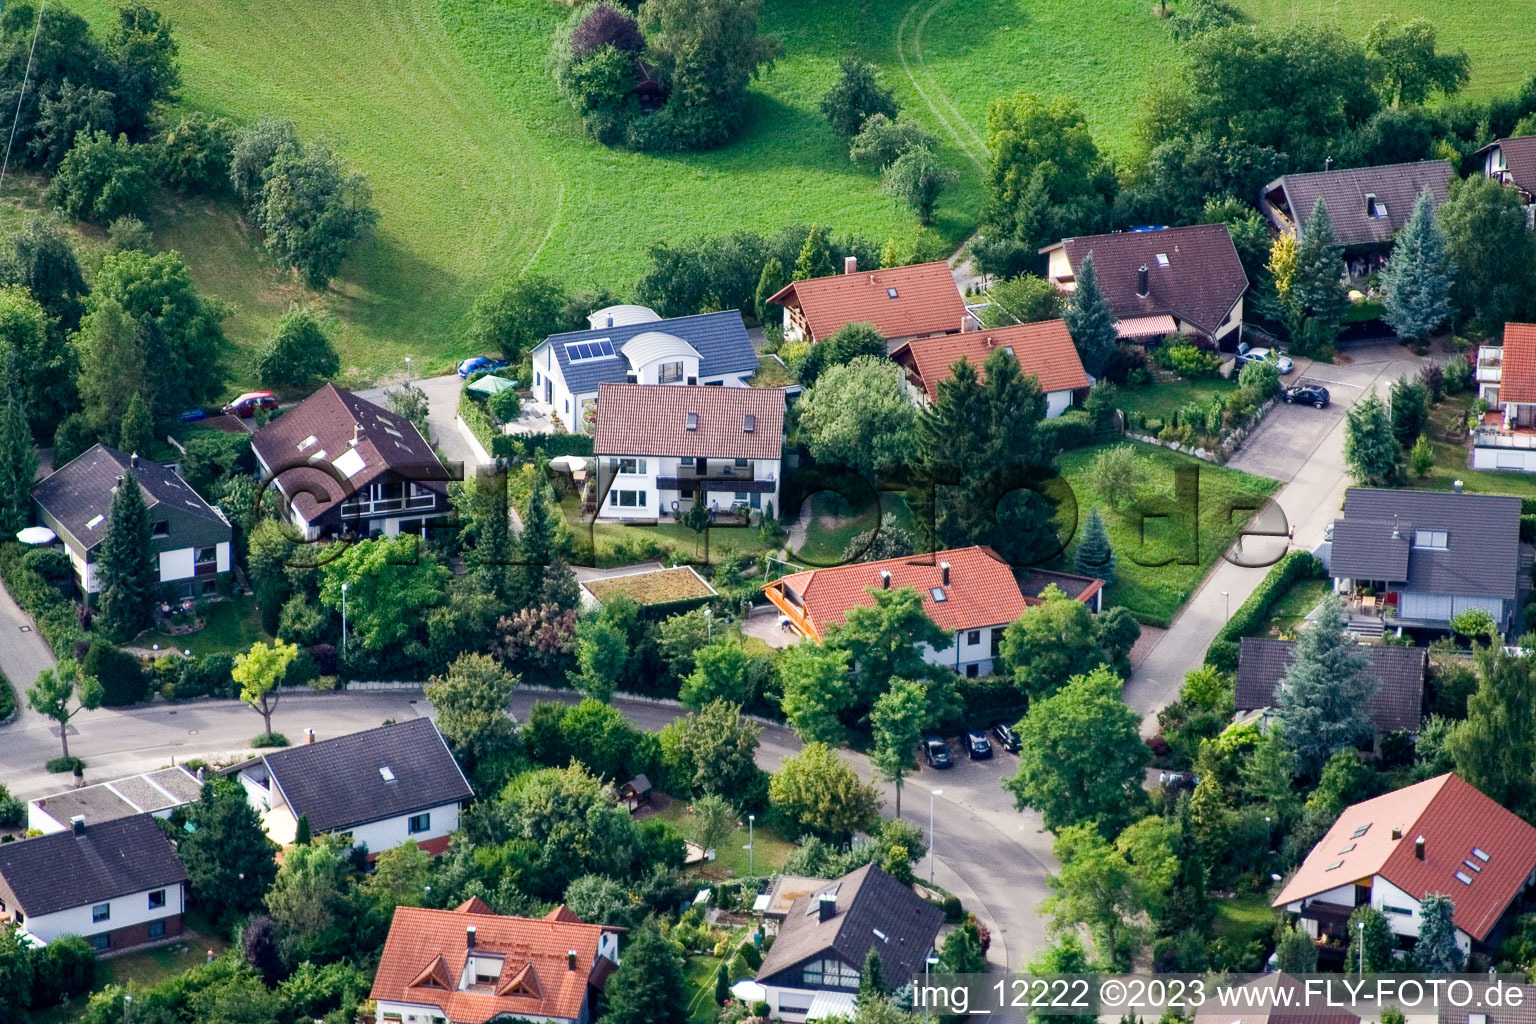 Ehbühl, Kirchhalde in Herrenberg in the state Baden-Wuerttemberg, Germany out of the air